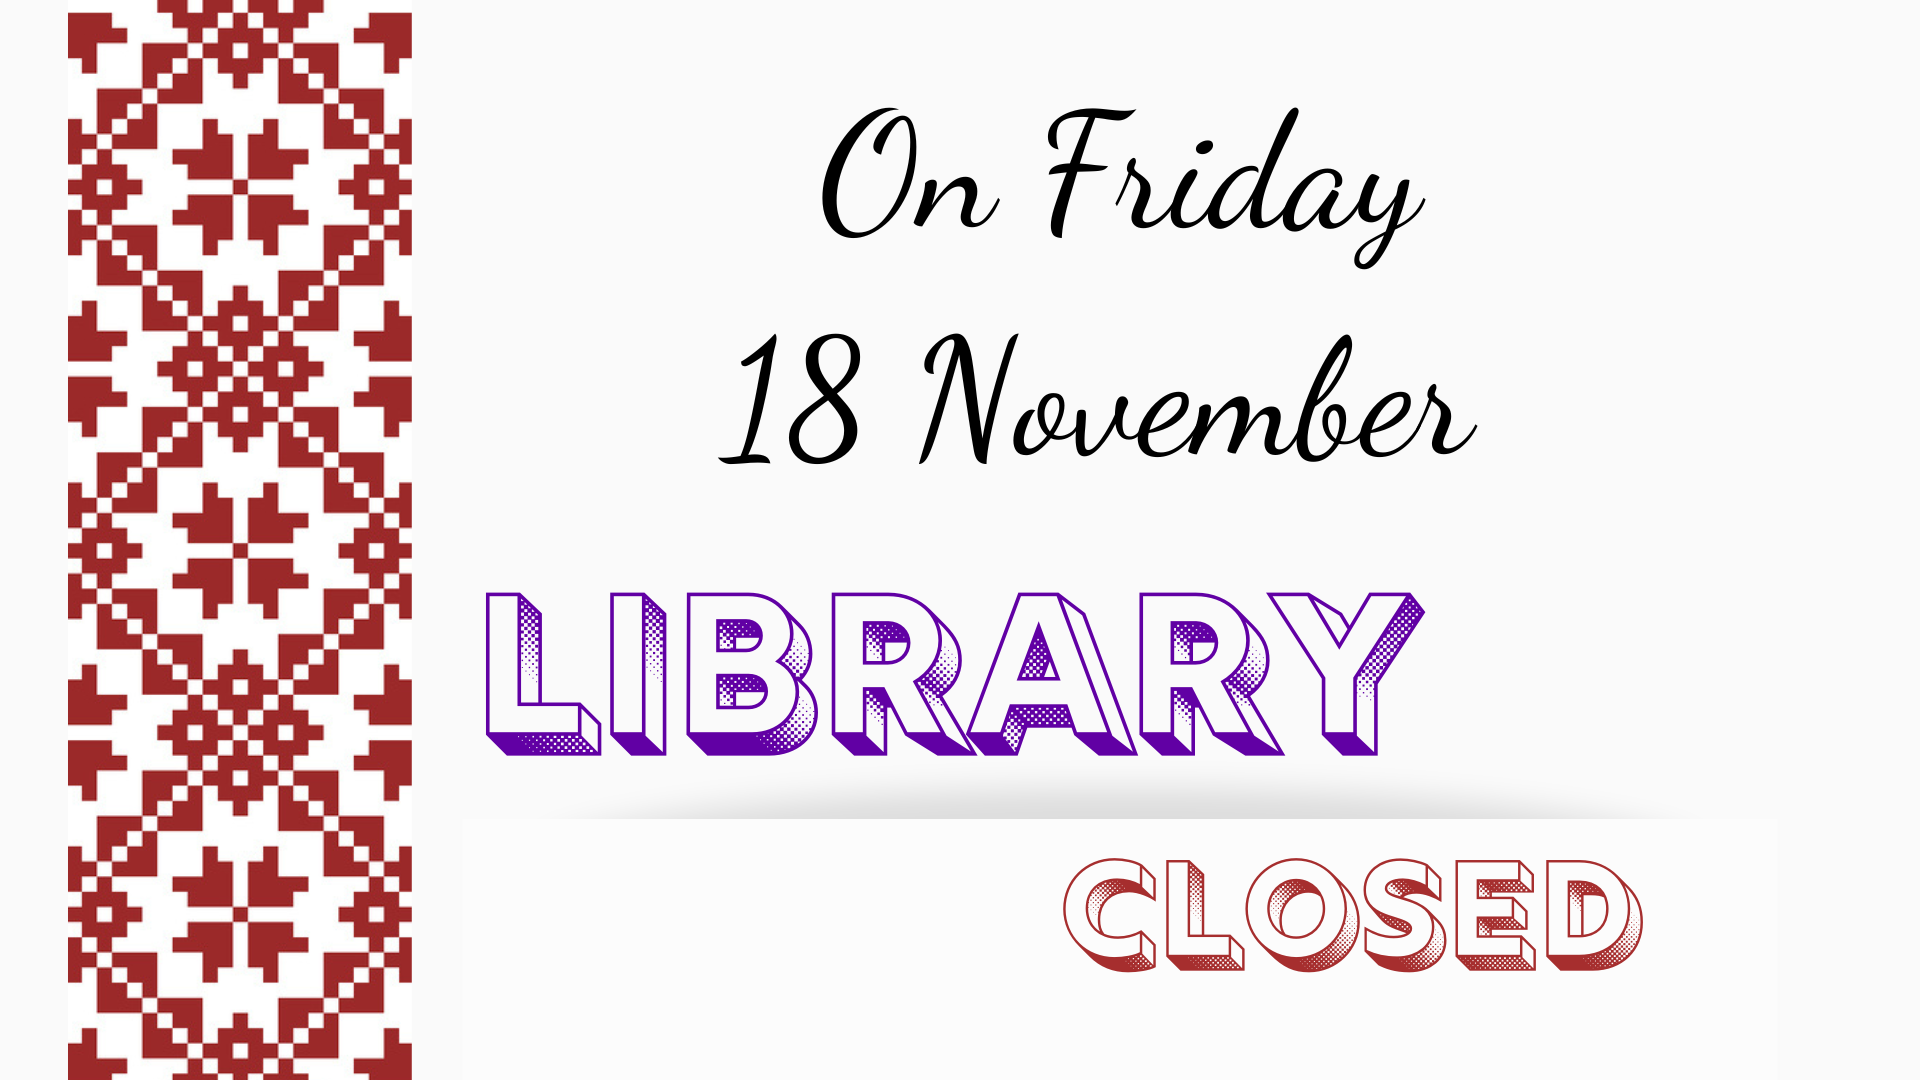 Fundamental Library of the Latvia University of Life Sciences and Technologies on Friday 18 November, 2022 closed.